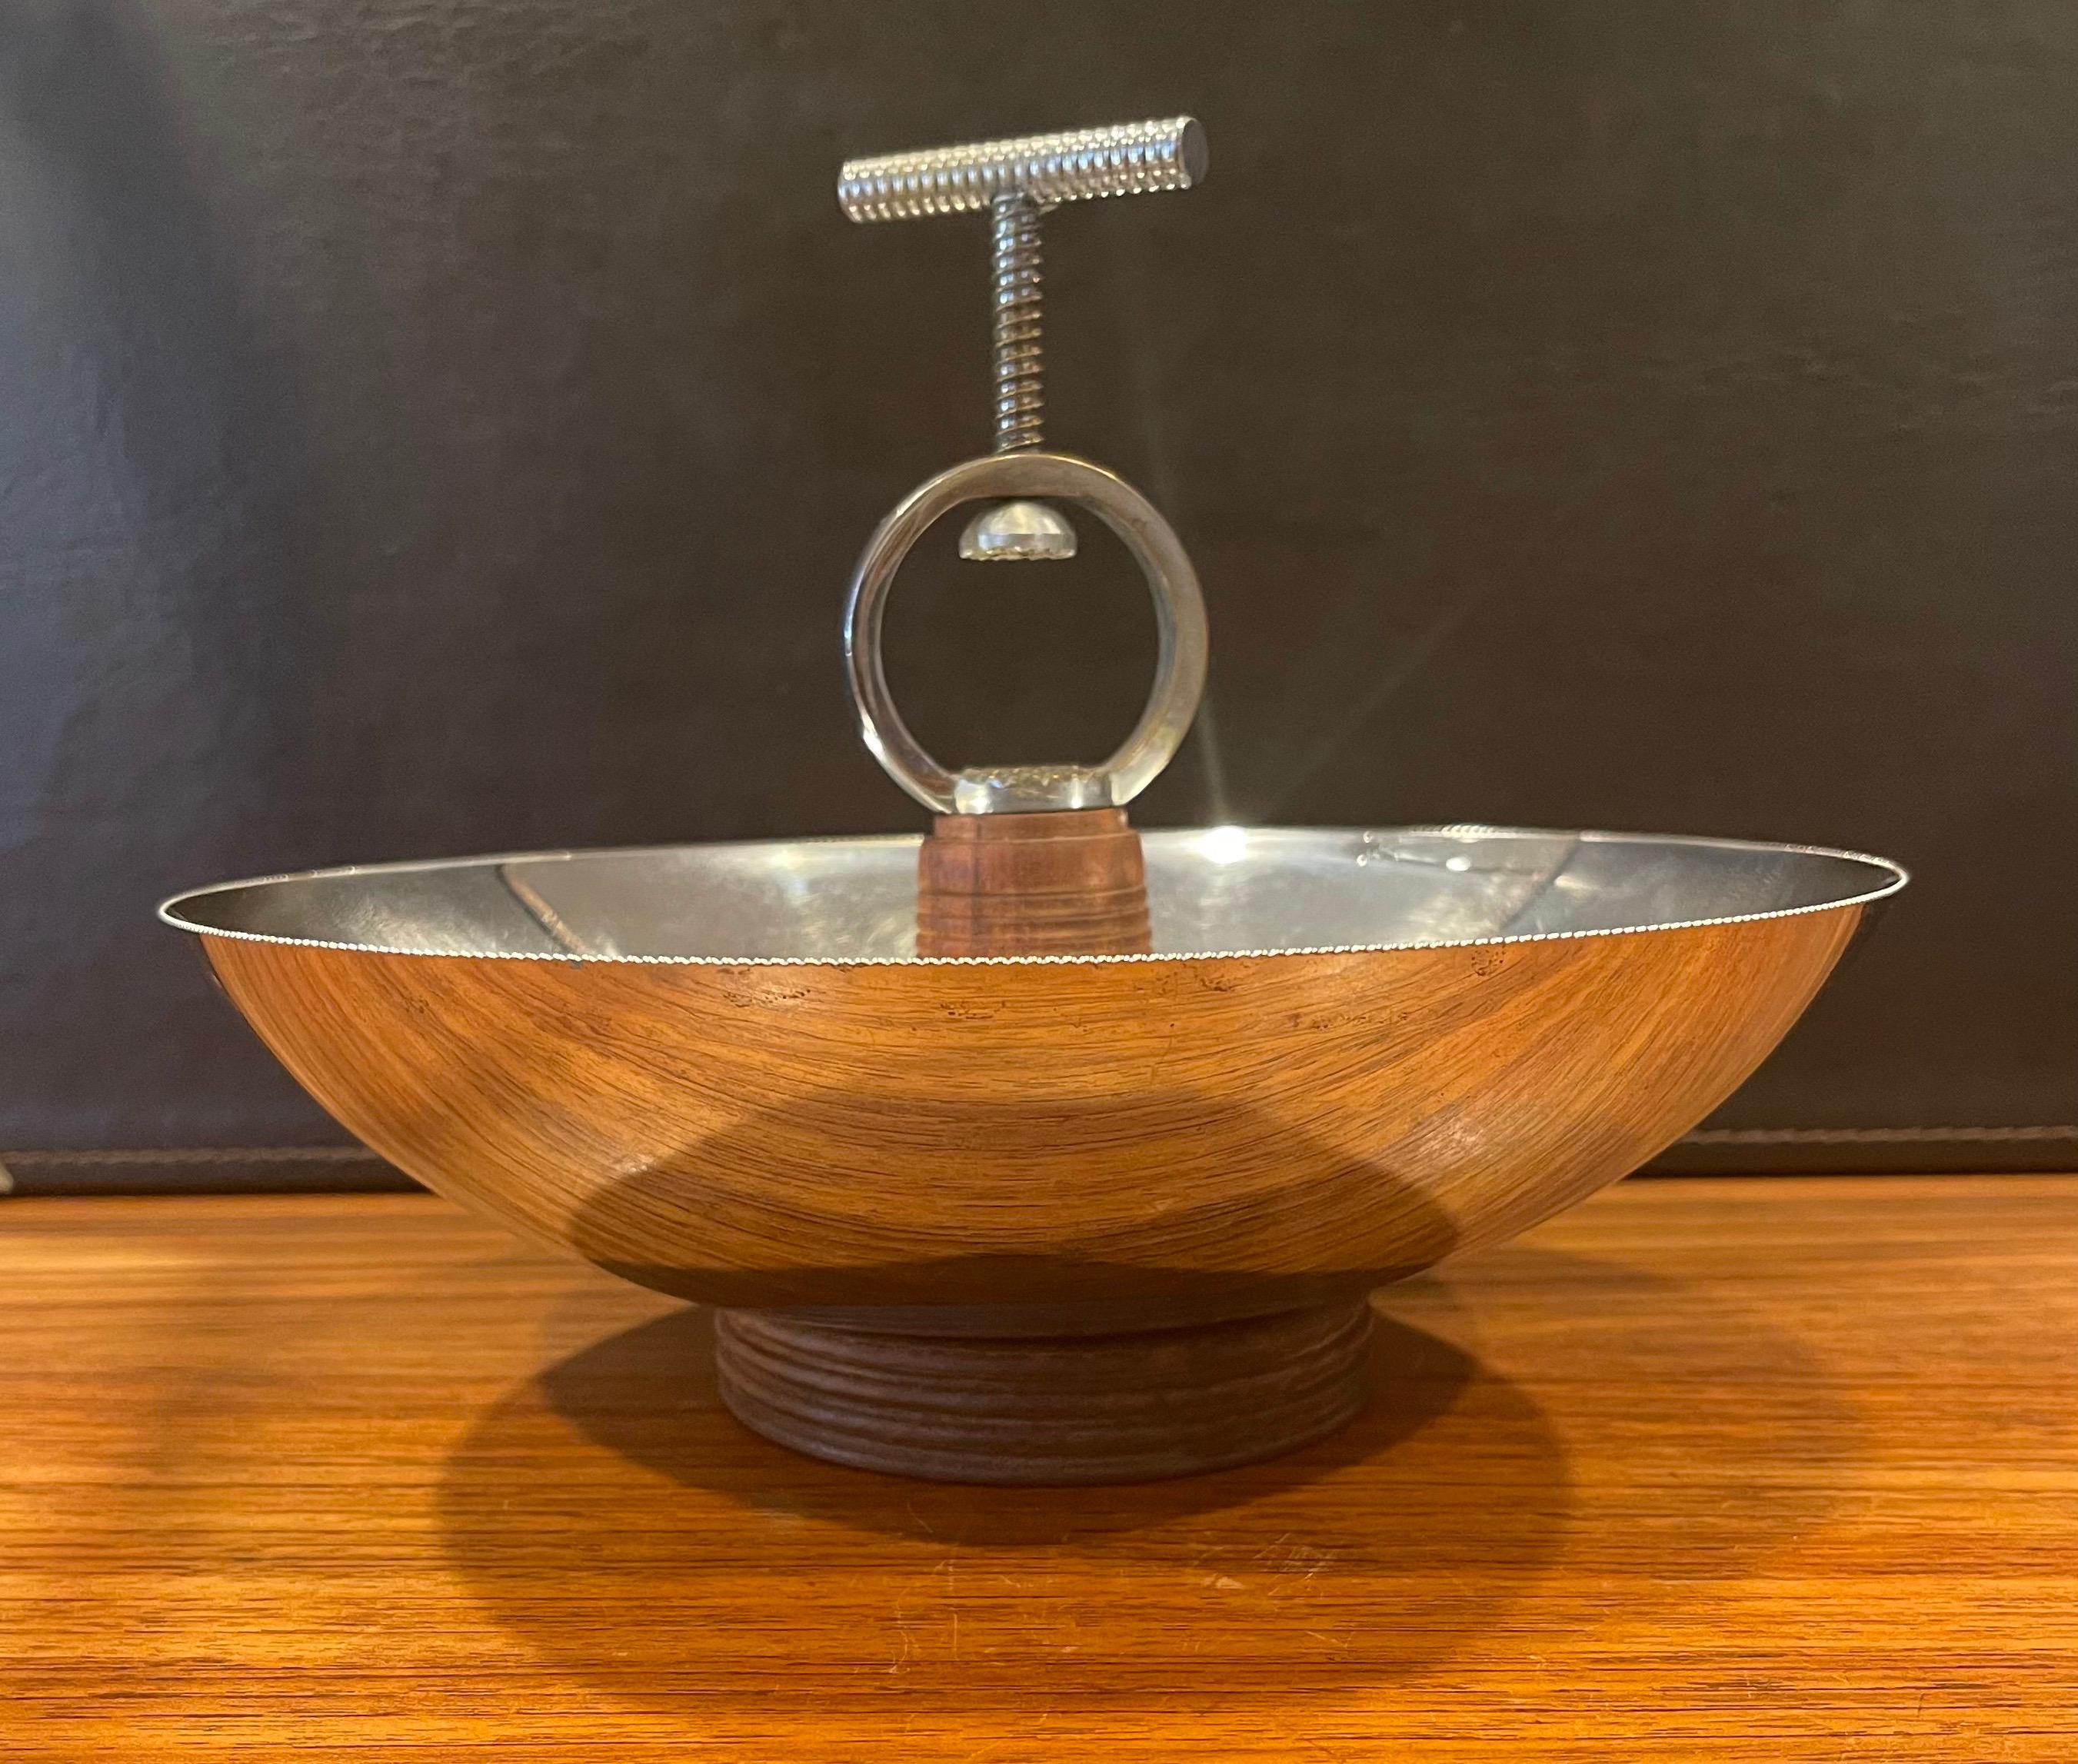 American Art Deco Chrome Nut Bowl with Built-in Cracker by Chase Co. For Sale